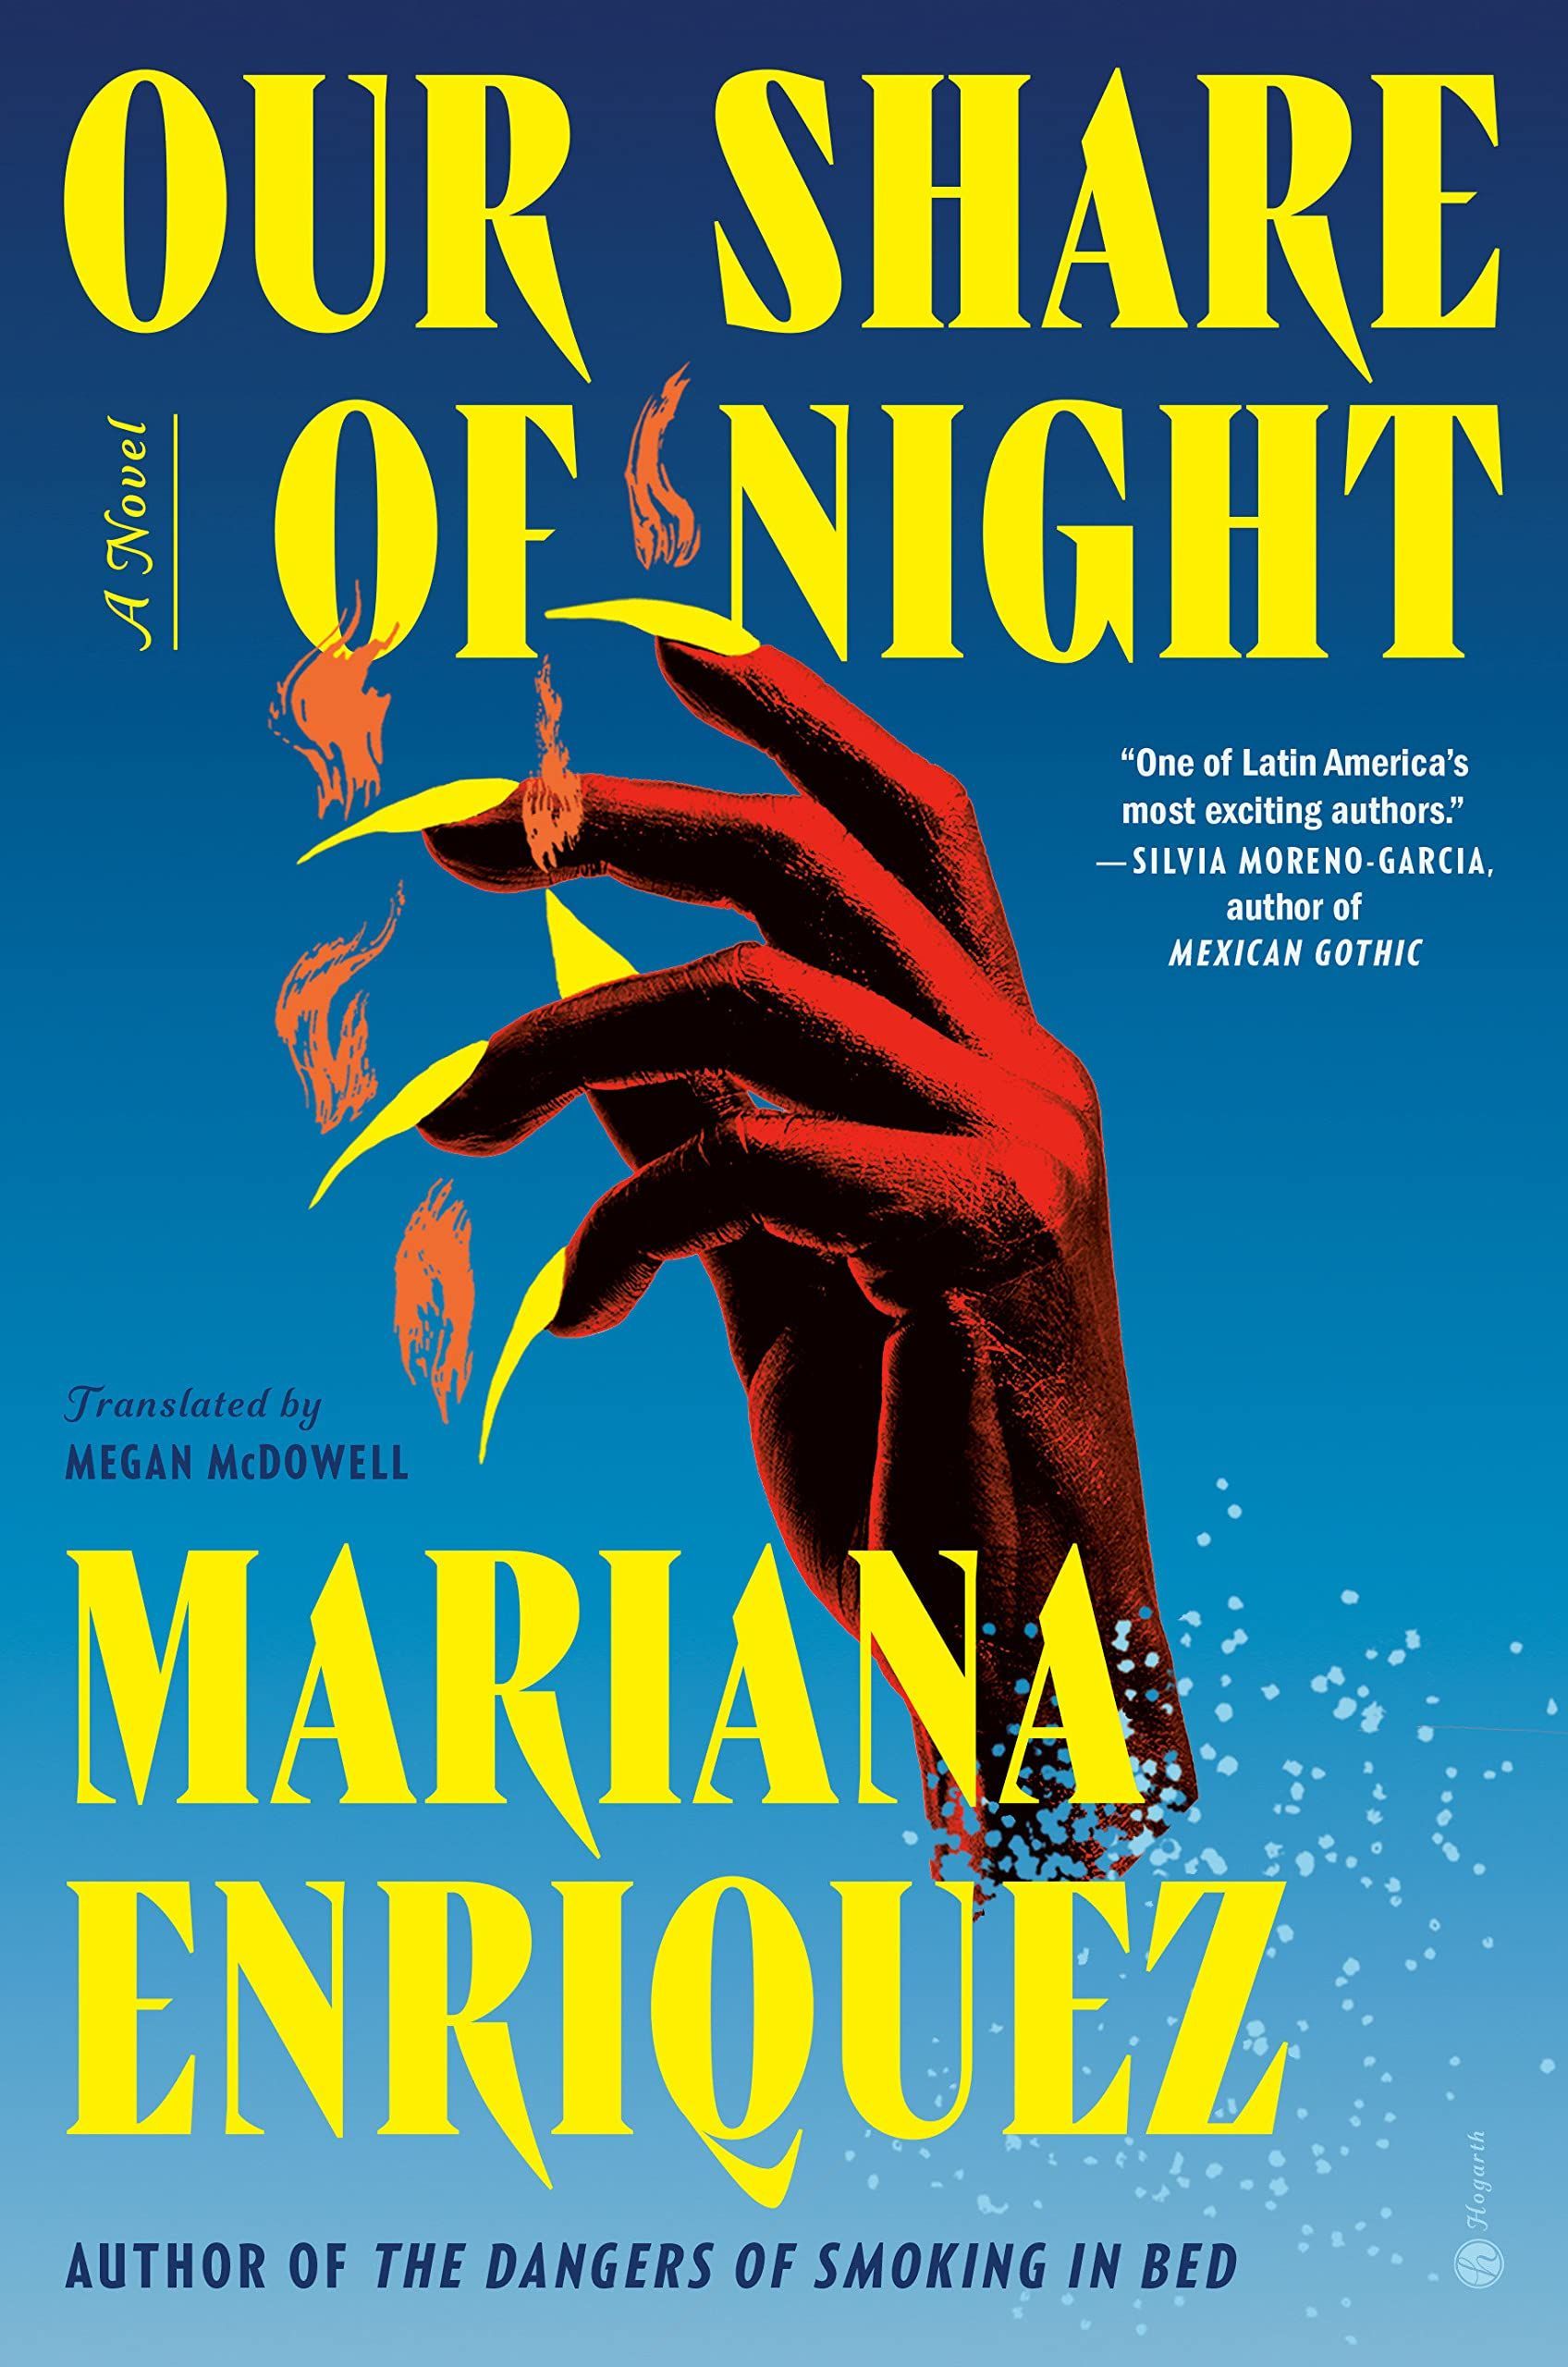 They Toss Bodies at You: On Mariana Enríquez’s “Our Share of Night”